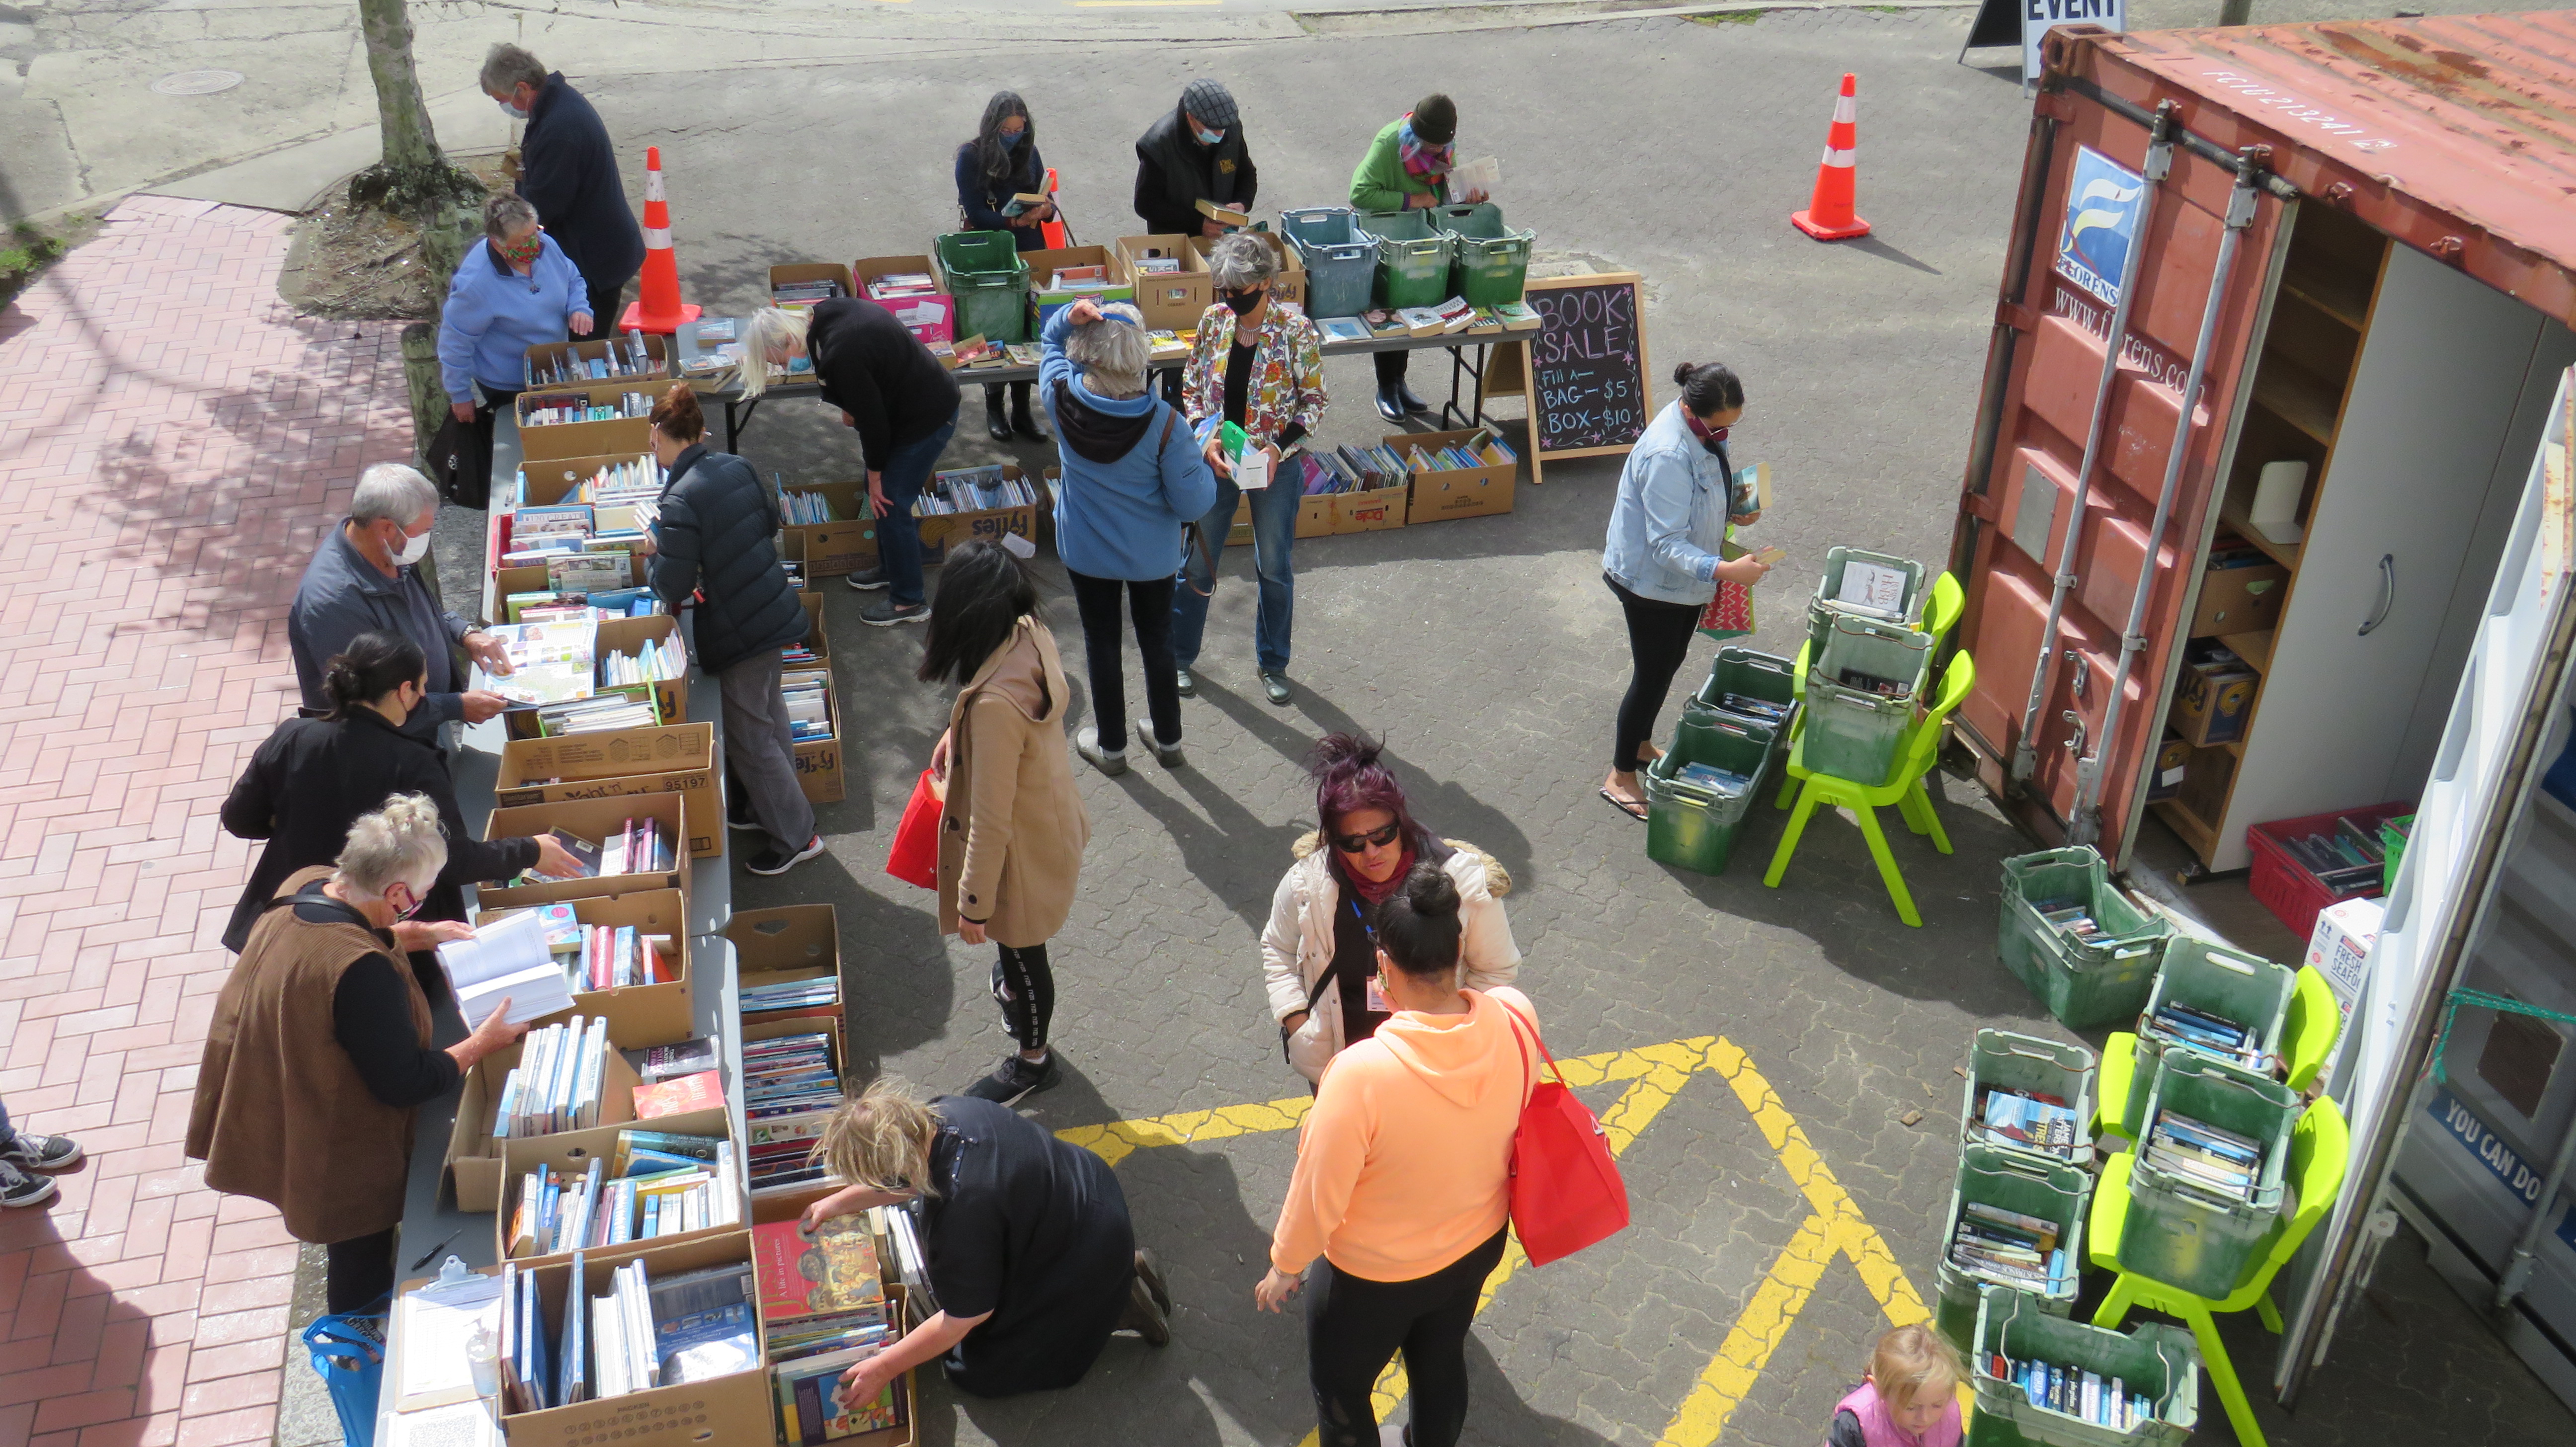 Photo of people looking at books at the library book sale in the Moody Place carpark